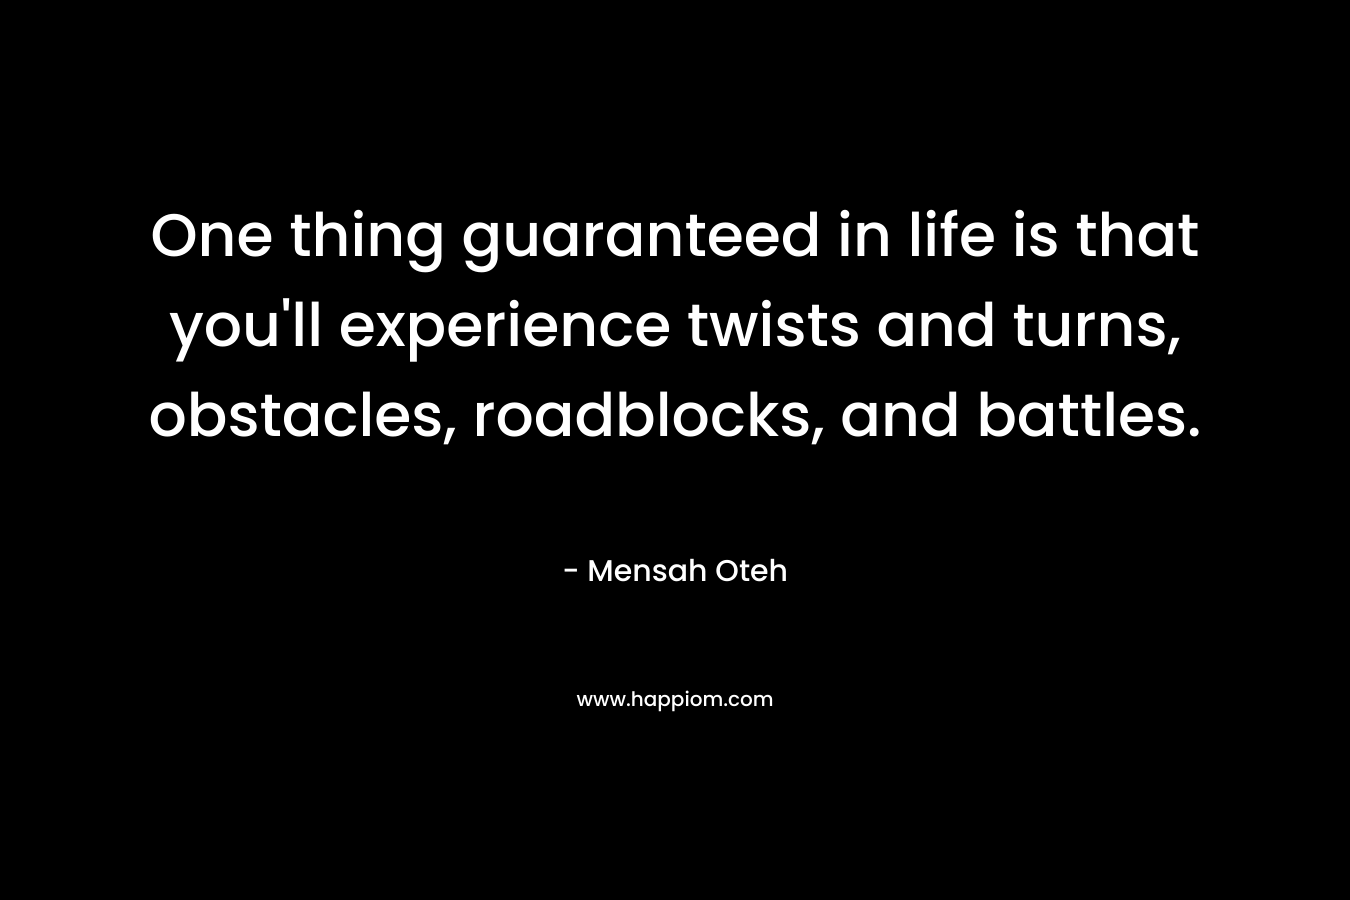 One thing guaranteed in life is that you'll experience twists and turns, obstacles, roadblocks, and battles.